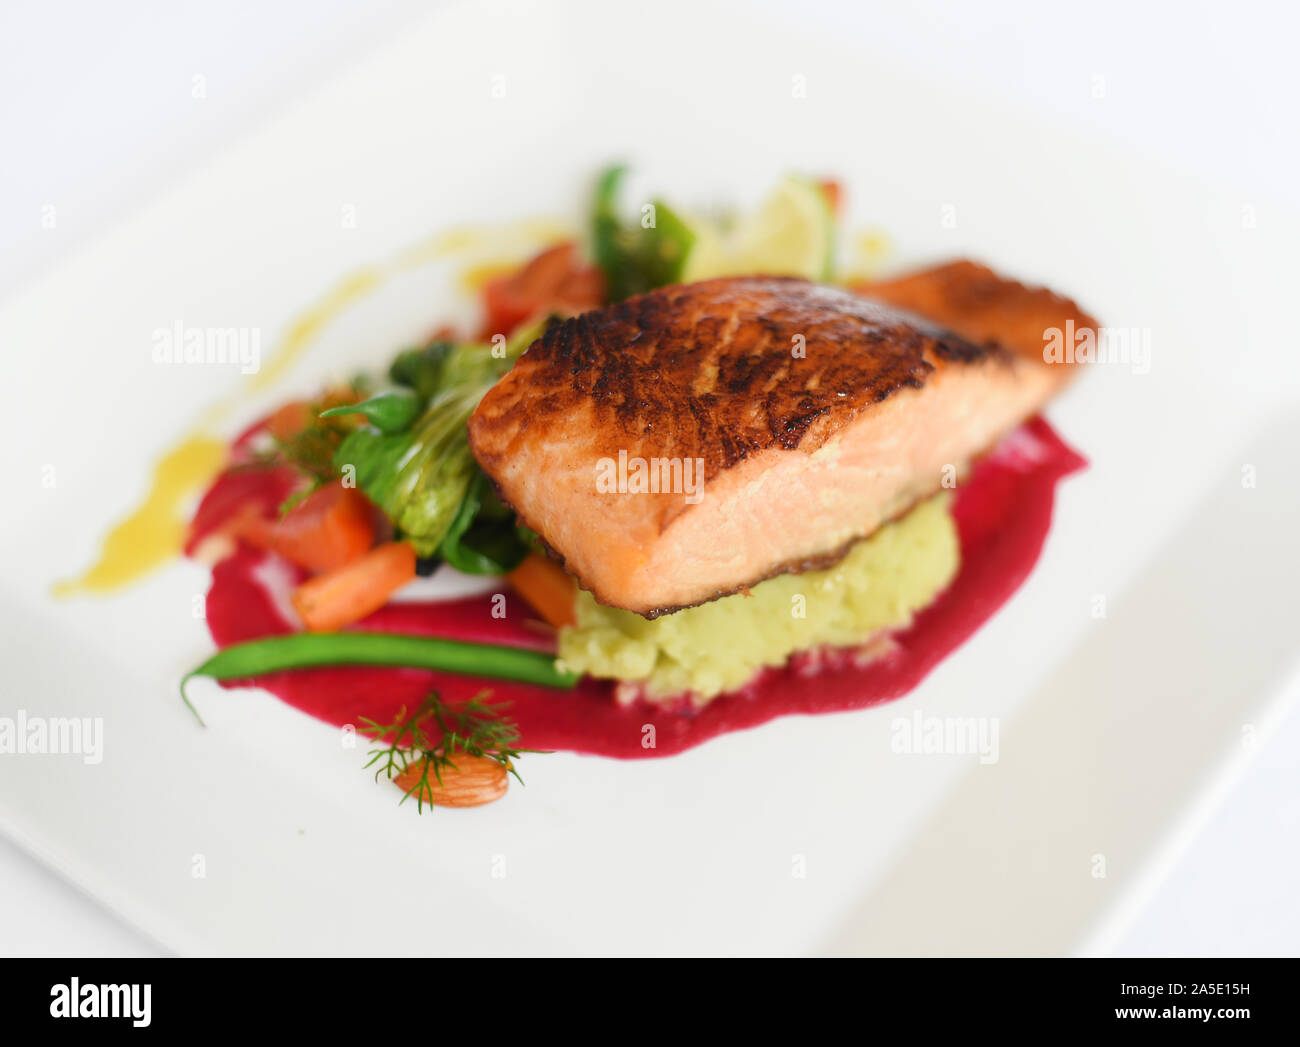 Fine dining, food photography,  gourmet Stock Photo